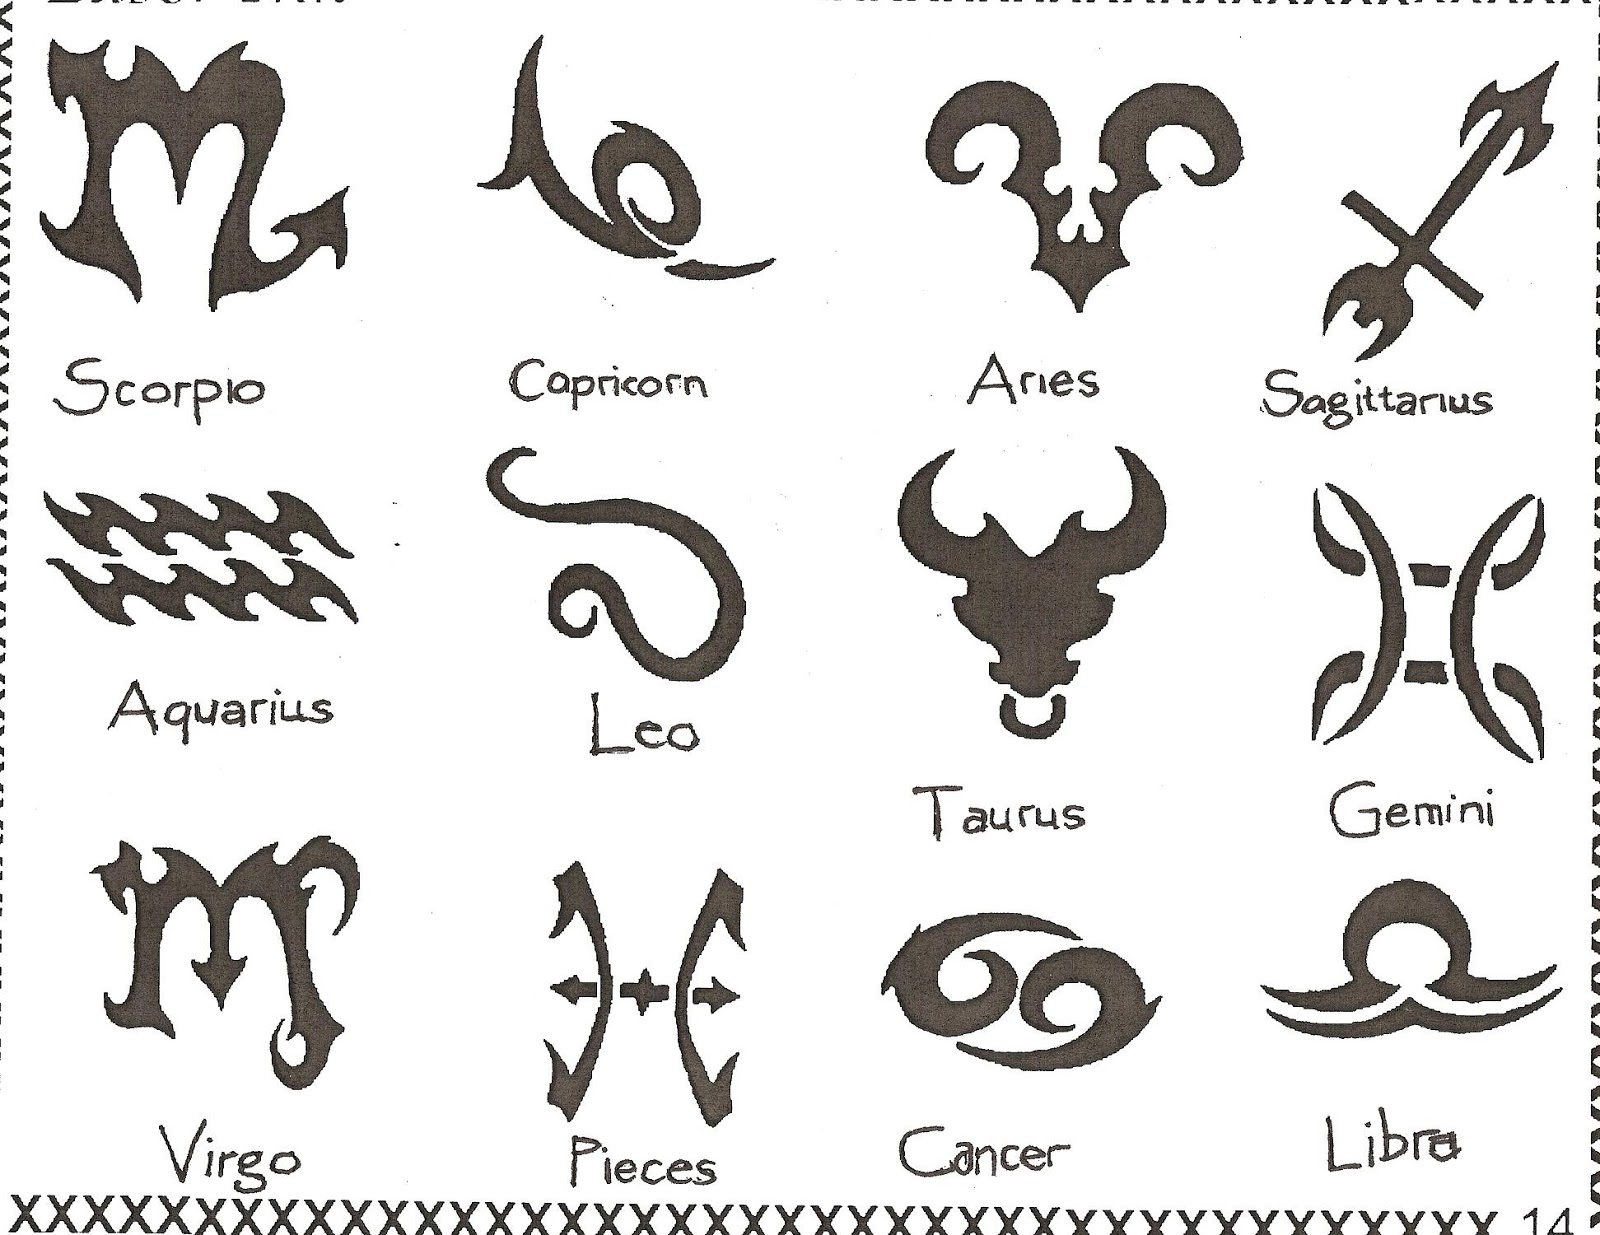 6. "Zodiac Sign Tattoo Placement Ideas" - wide 2